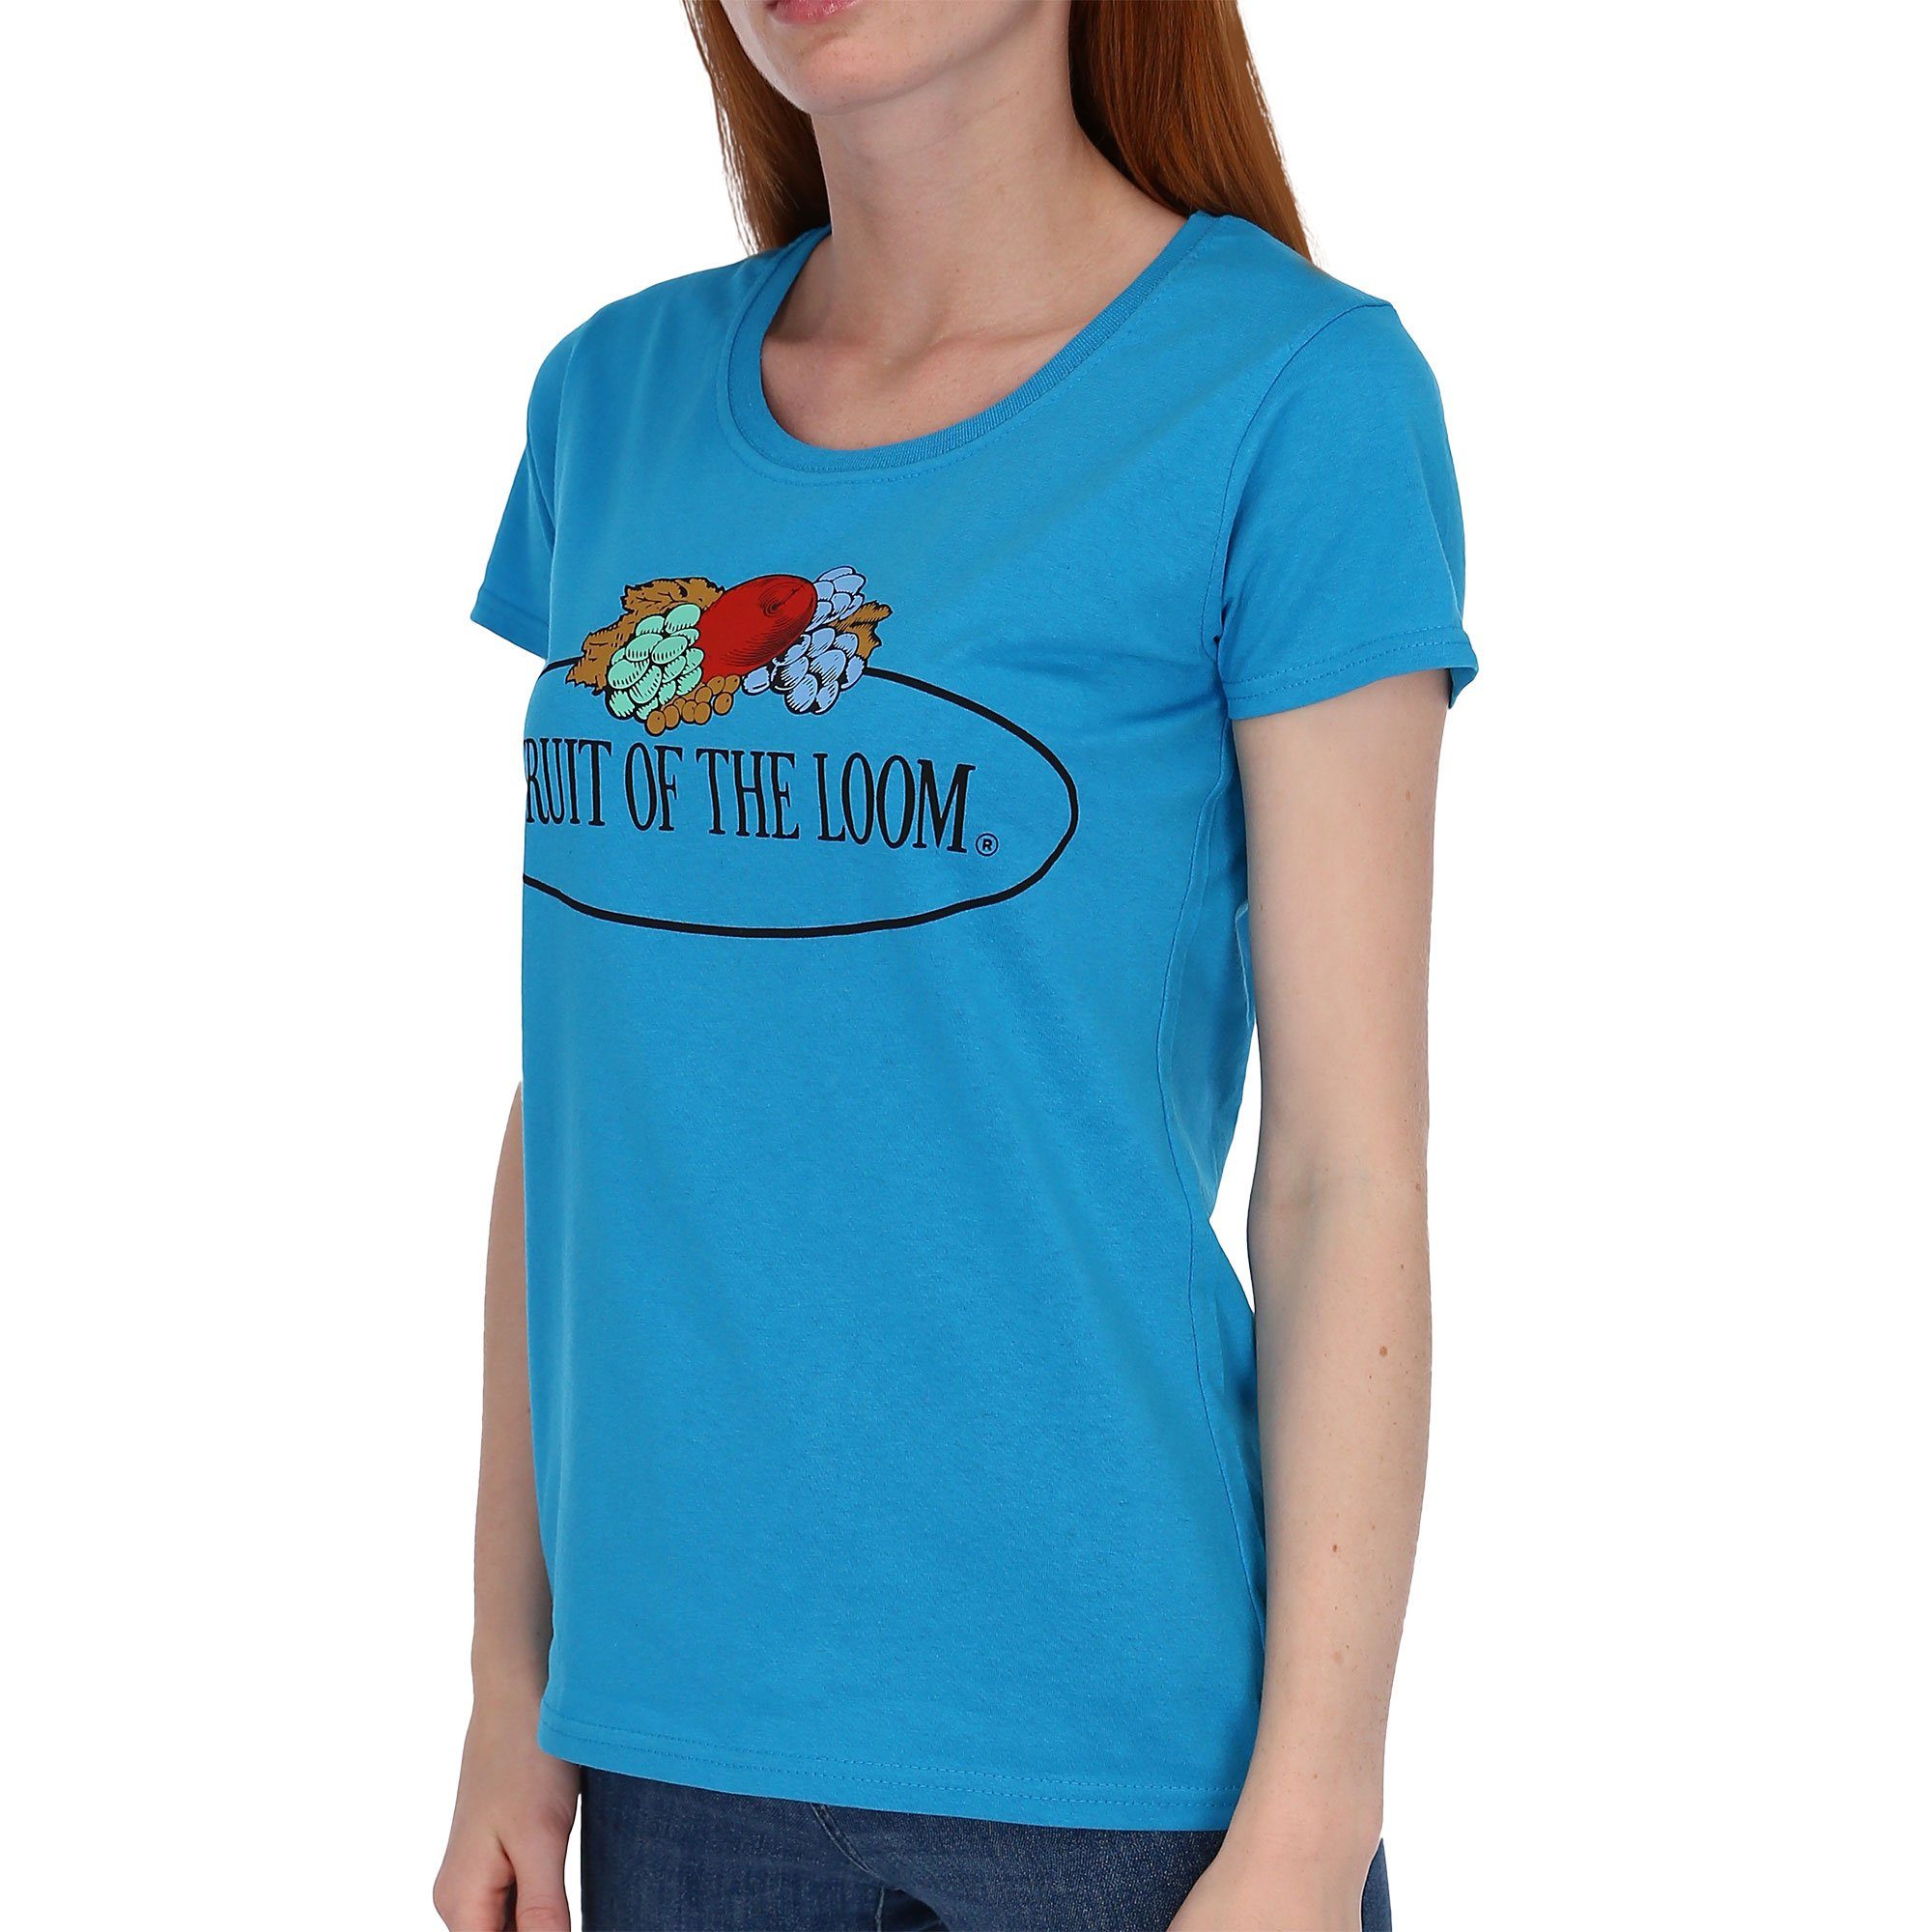 Fruit of the Loom Rundhalsshirt Fruit of the Loom Fruit of the Loom Damen T-Shirt mit Logo azurblau